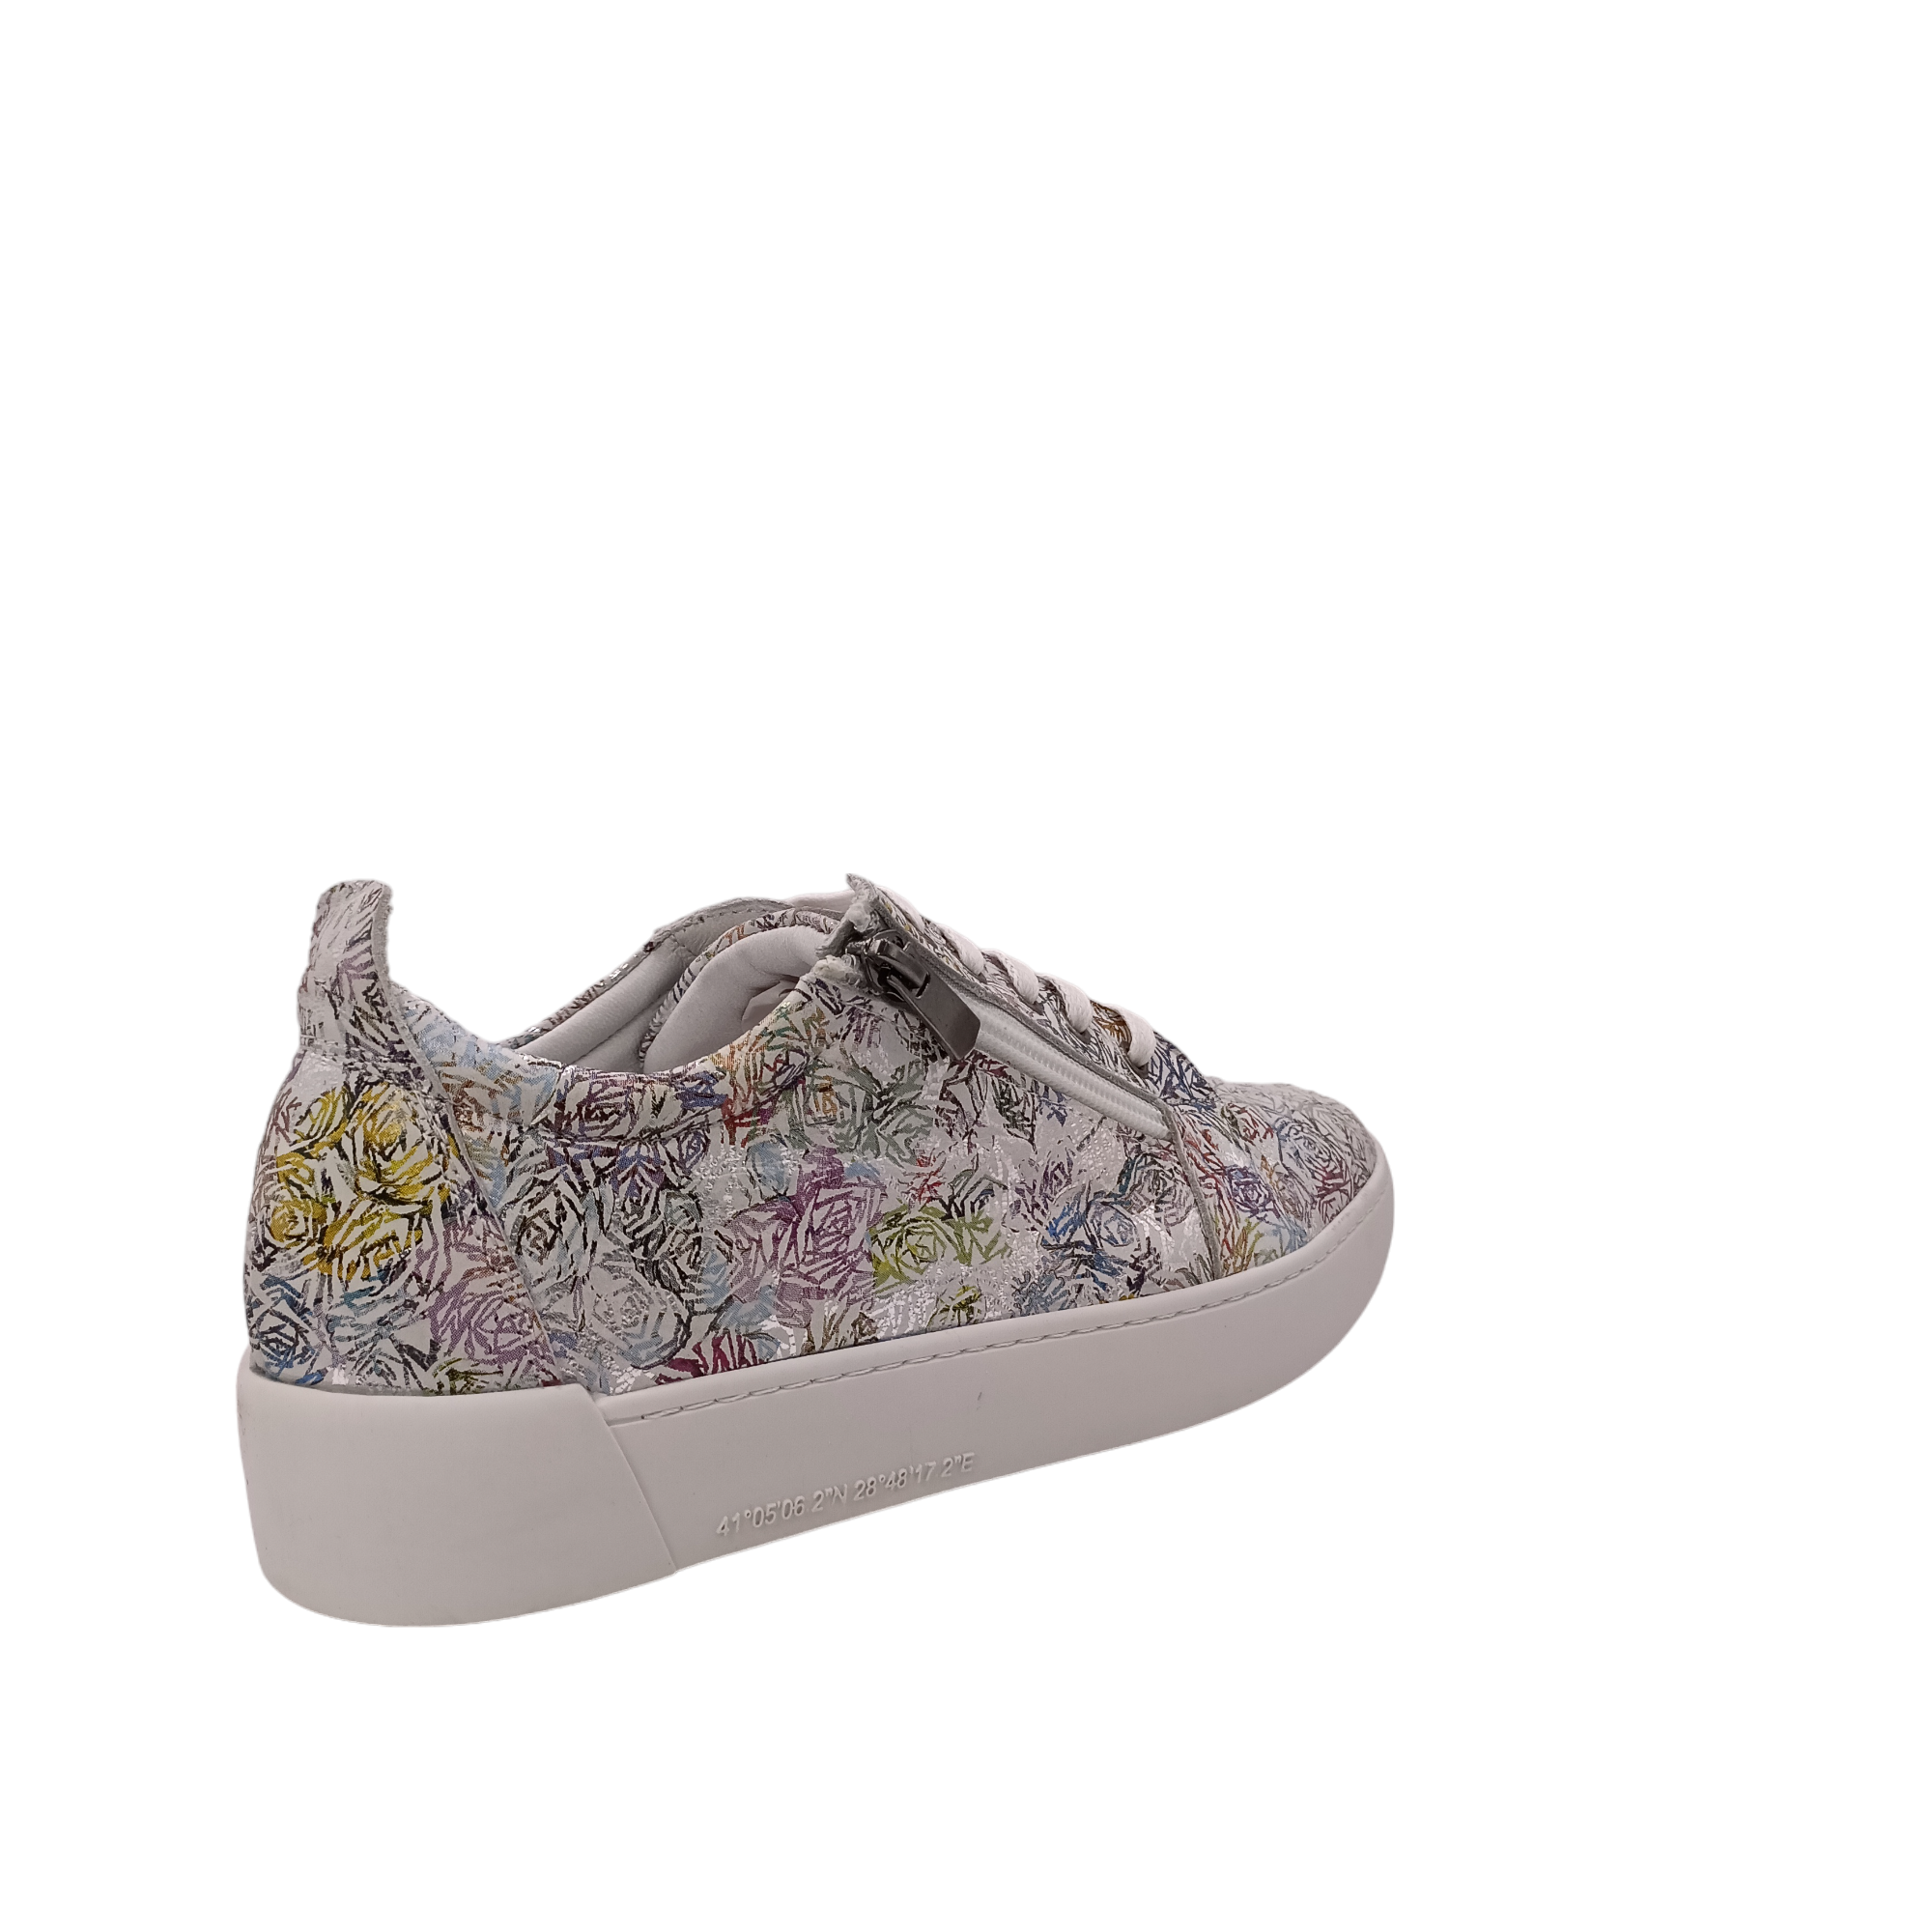 Side angle view of Tarzan Leather printed shoe with floral outlines, multi coloured print. White laces and sole. Shop Womens Rilassare Shoes Online and IN-store with shoe&me NZ